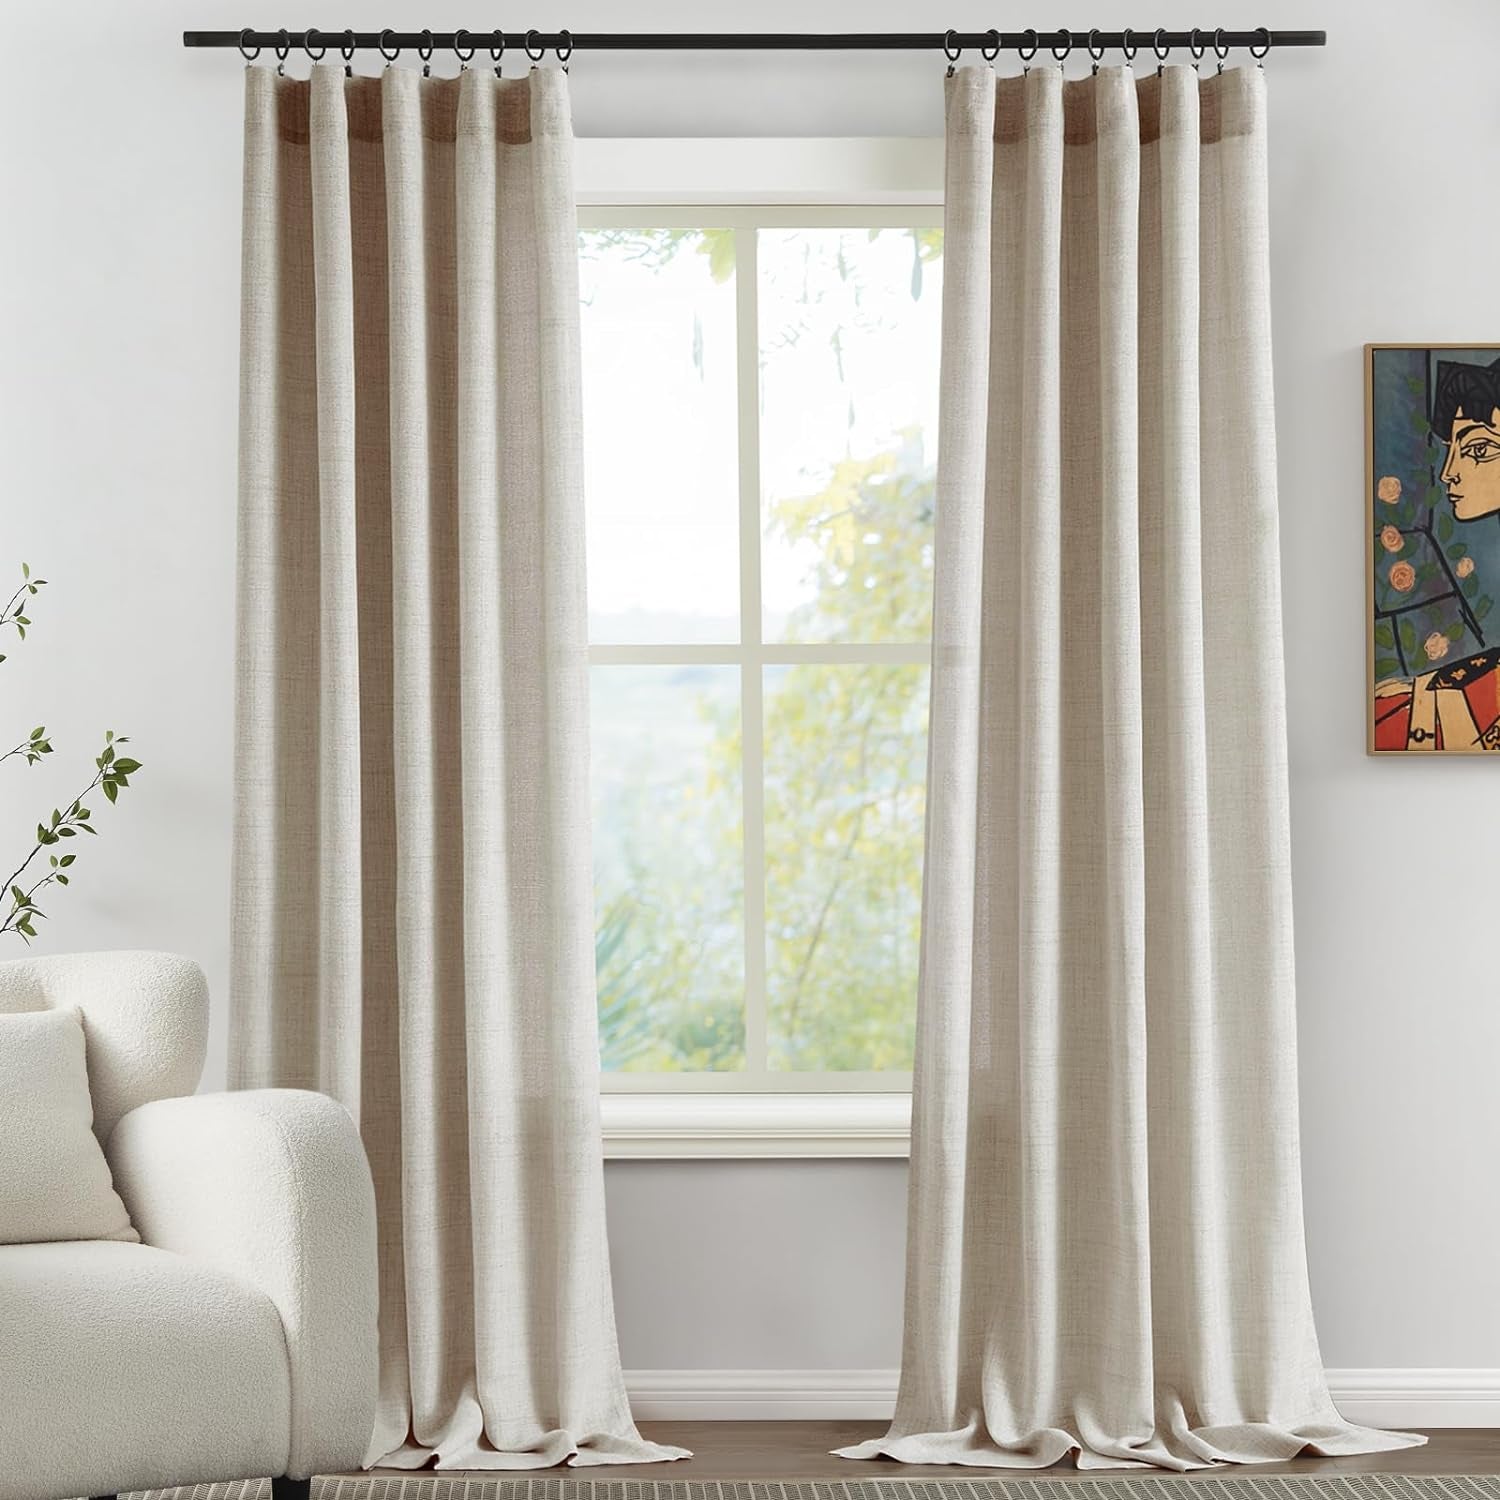 Melodieux Linen Curtains 84 Inches Long for Bedroom - Rod Pocket Burlap Linen Textured Semi Sheer Curtains Light Filtering Privacy Farmhouse Living Room Drapes (Set of 2, 52Inch X 84Inch, Beige)  Melodieux   